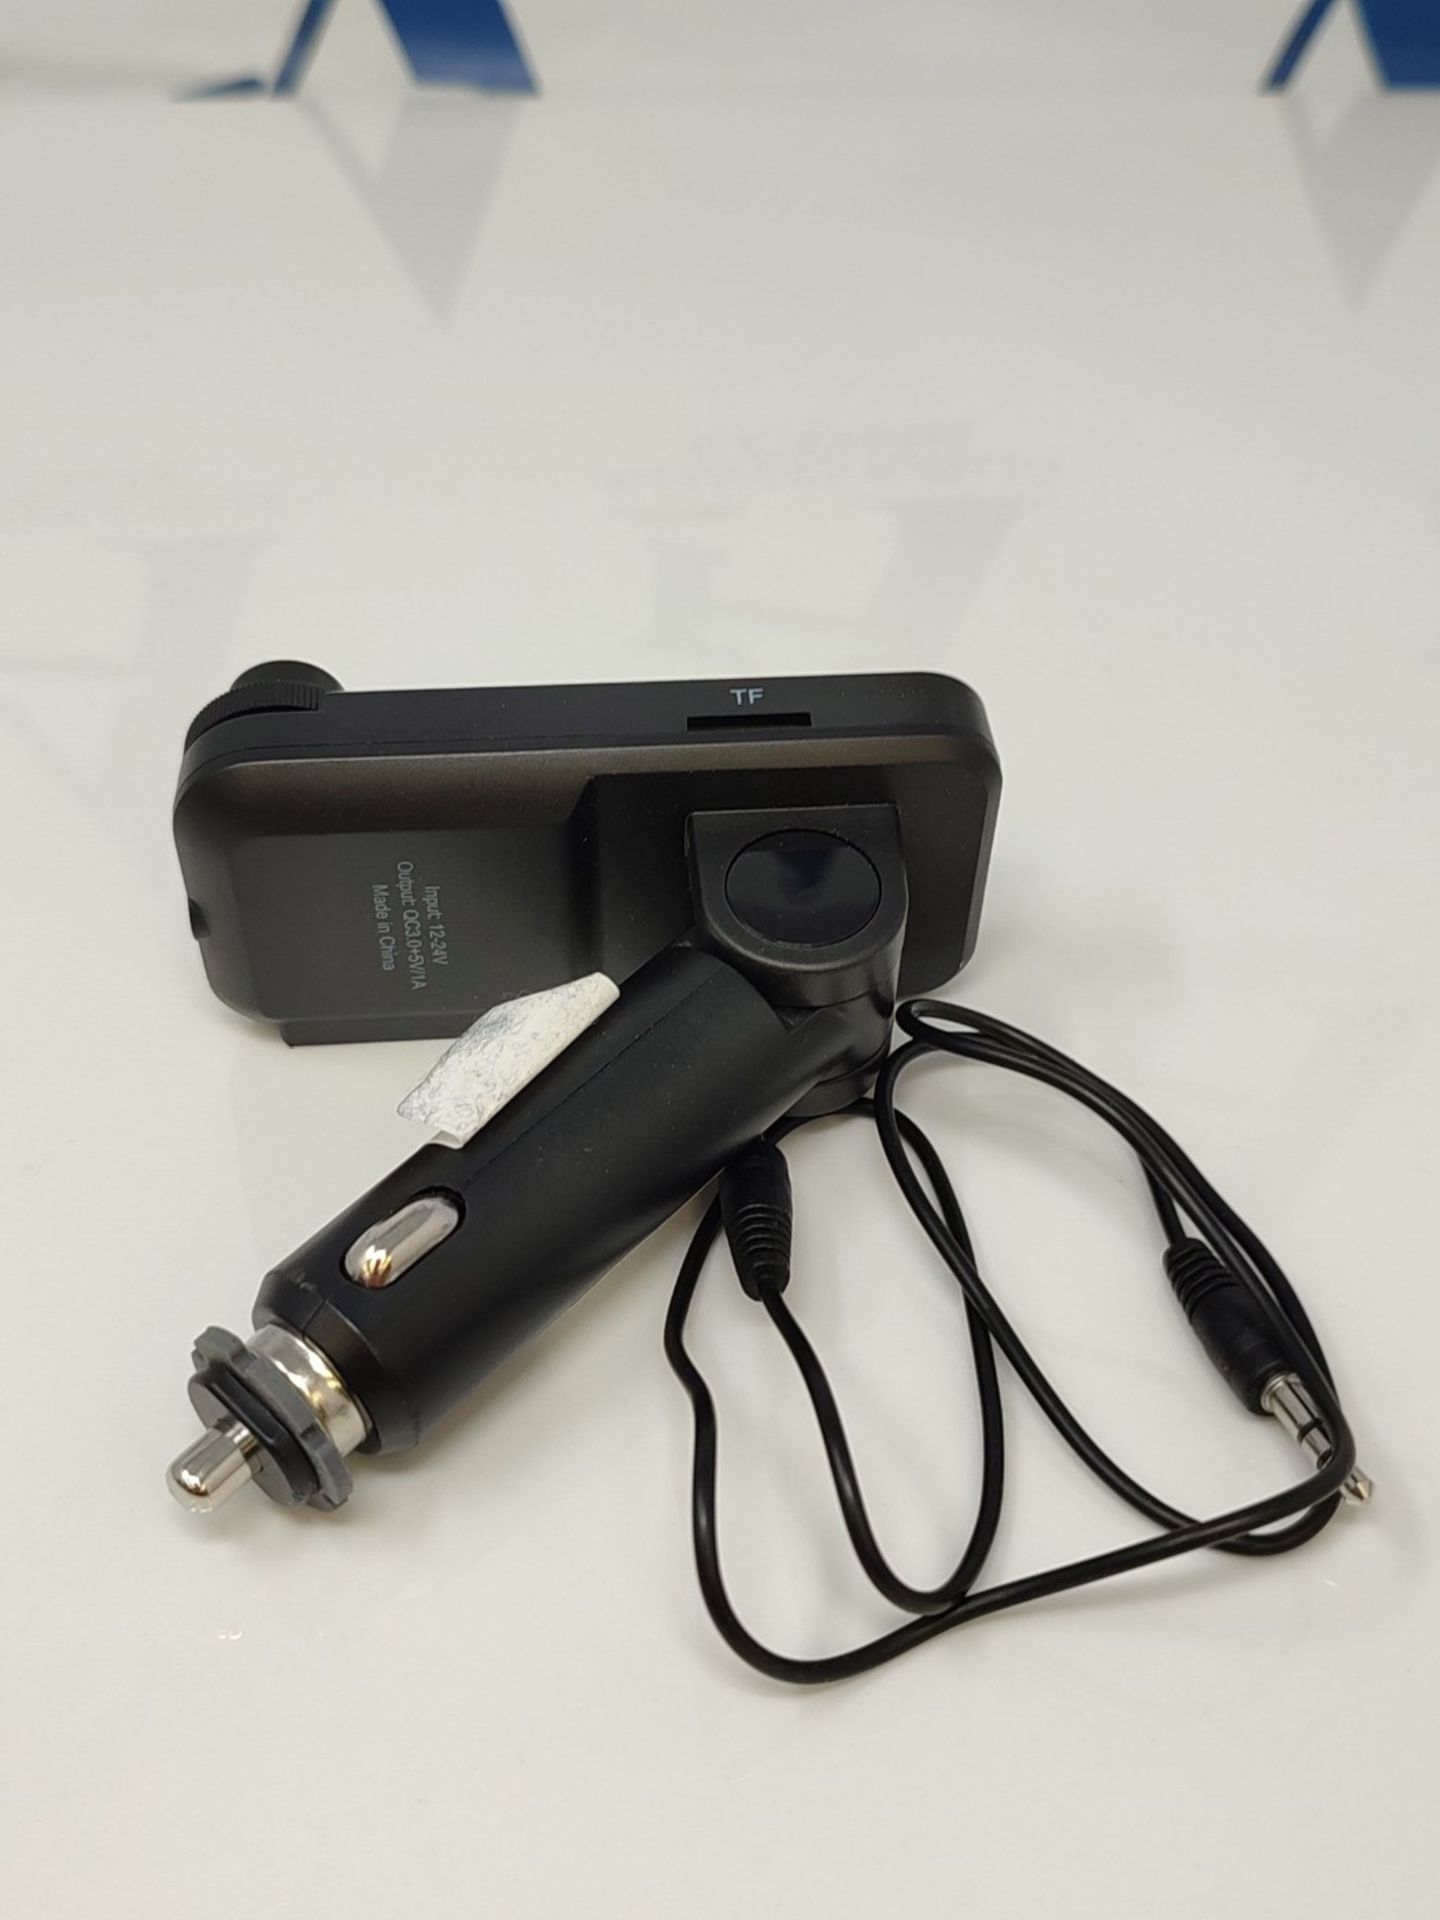 Bluetooth Auto FM Transmitter, Car Music Adapter Lighter for Car Radio, Support QC3.0 - Image 3 of 3